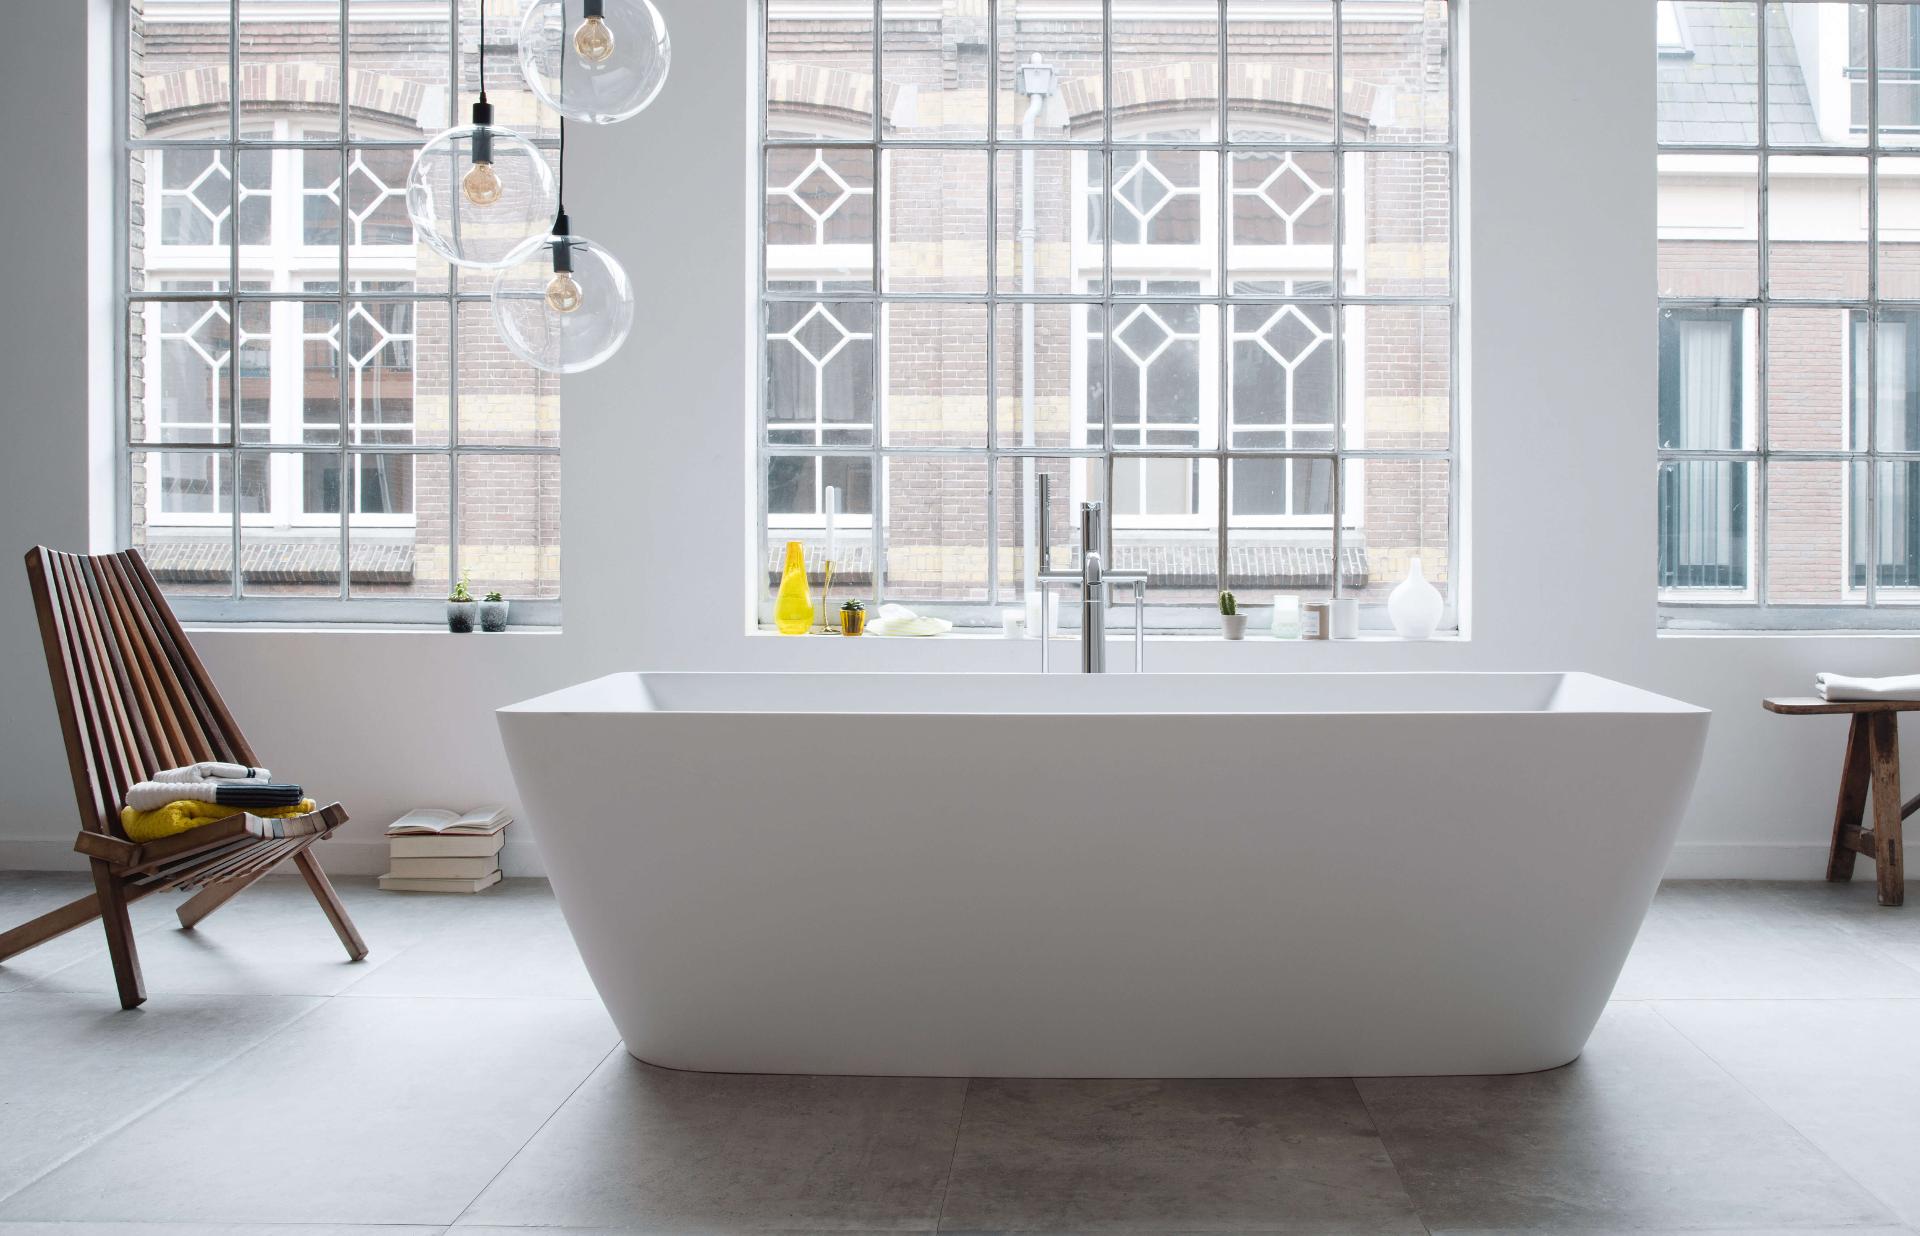 Large DuraSquare bathtub in front of window

